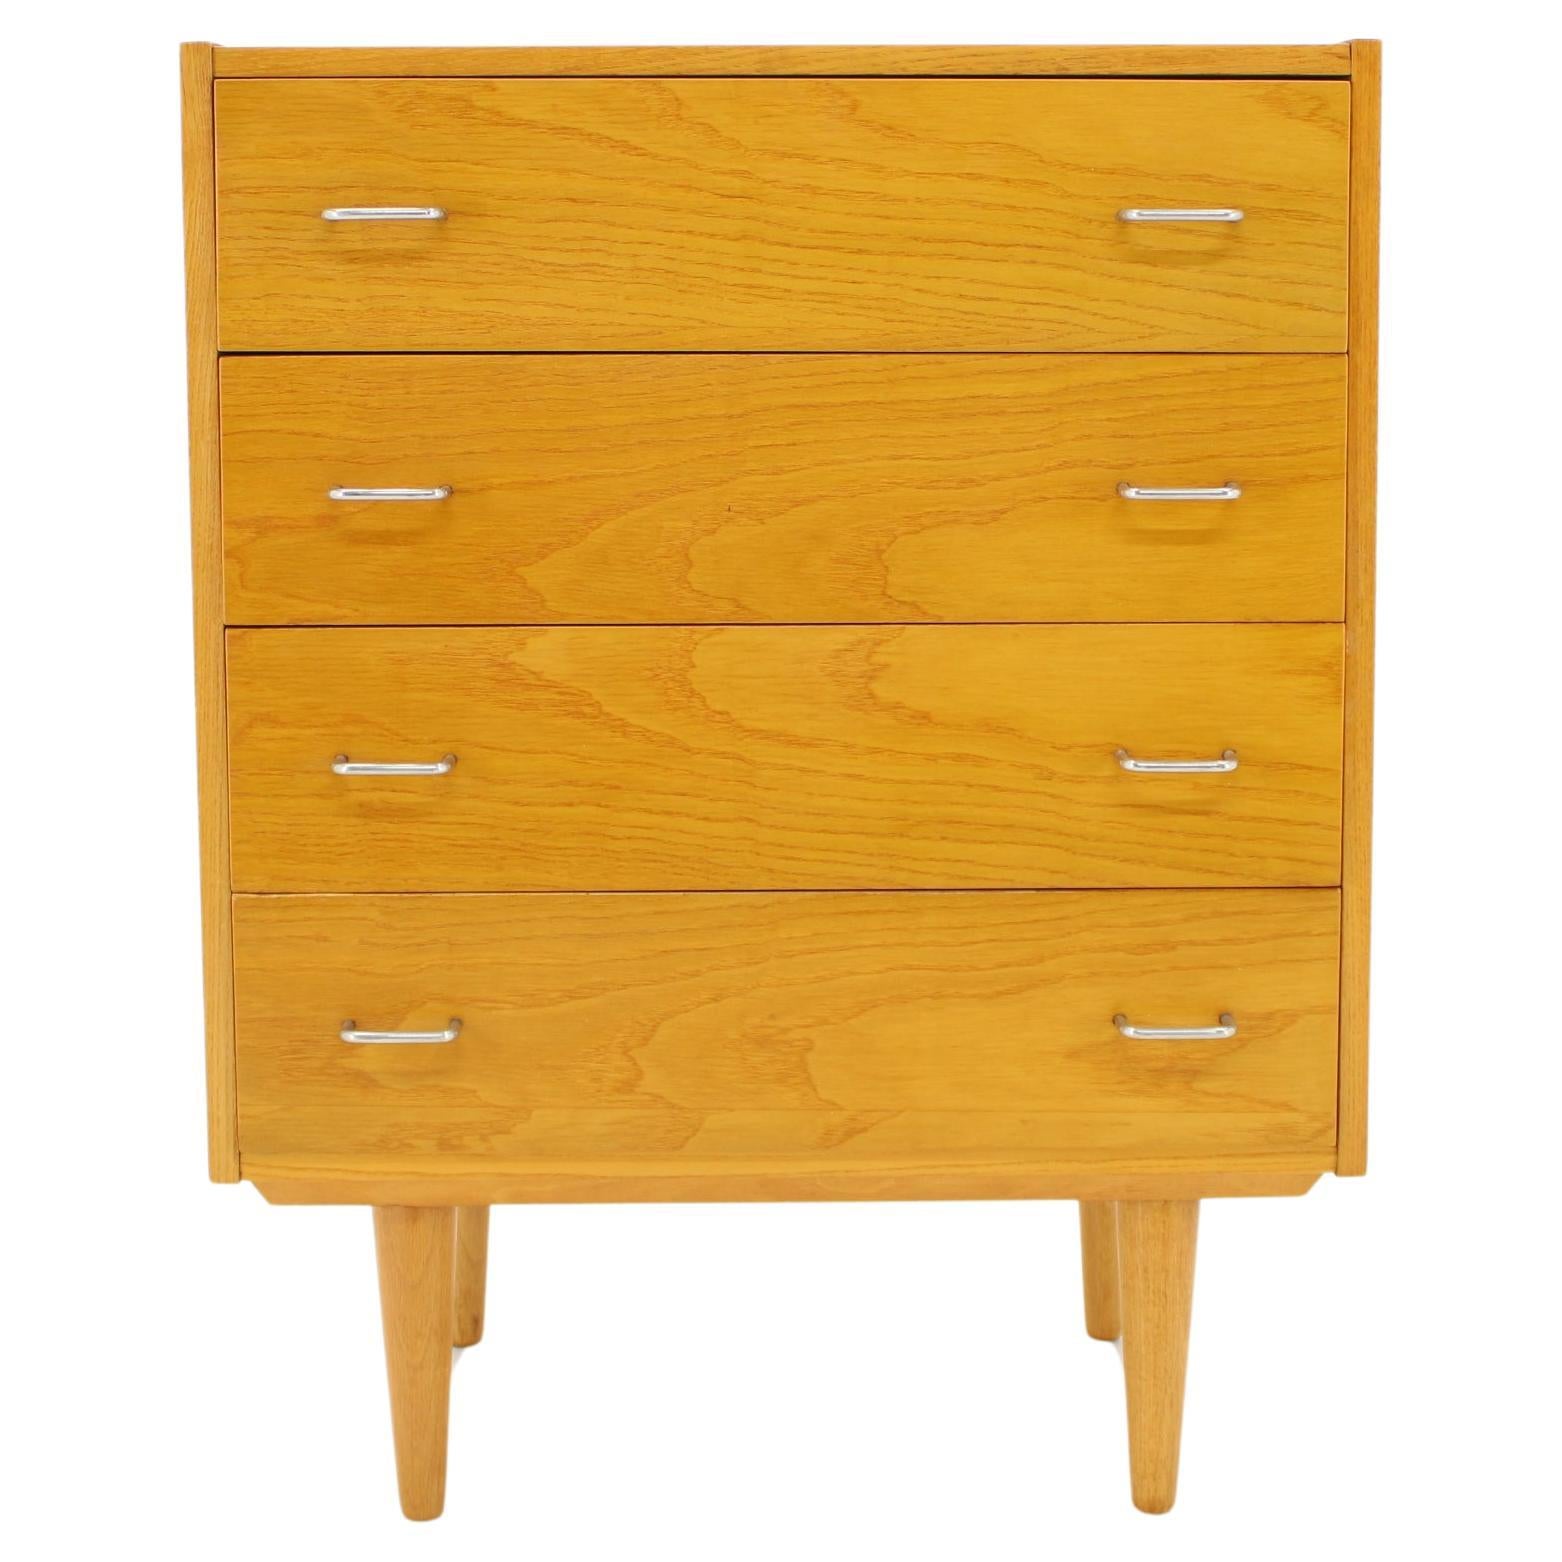 1960s Chest of Drawers in Maple Finish, Czechoslovakia